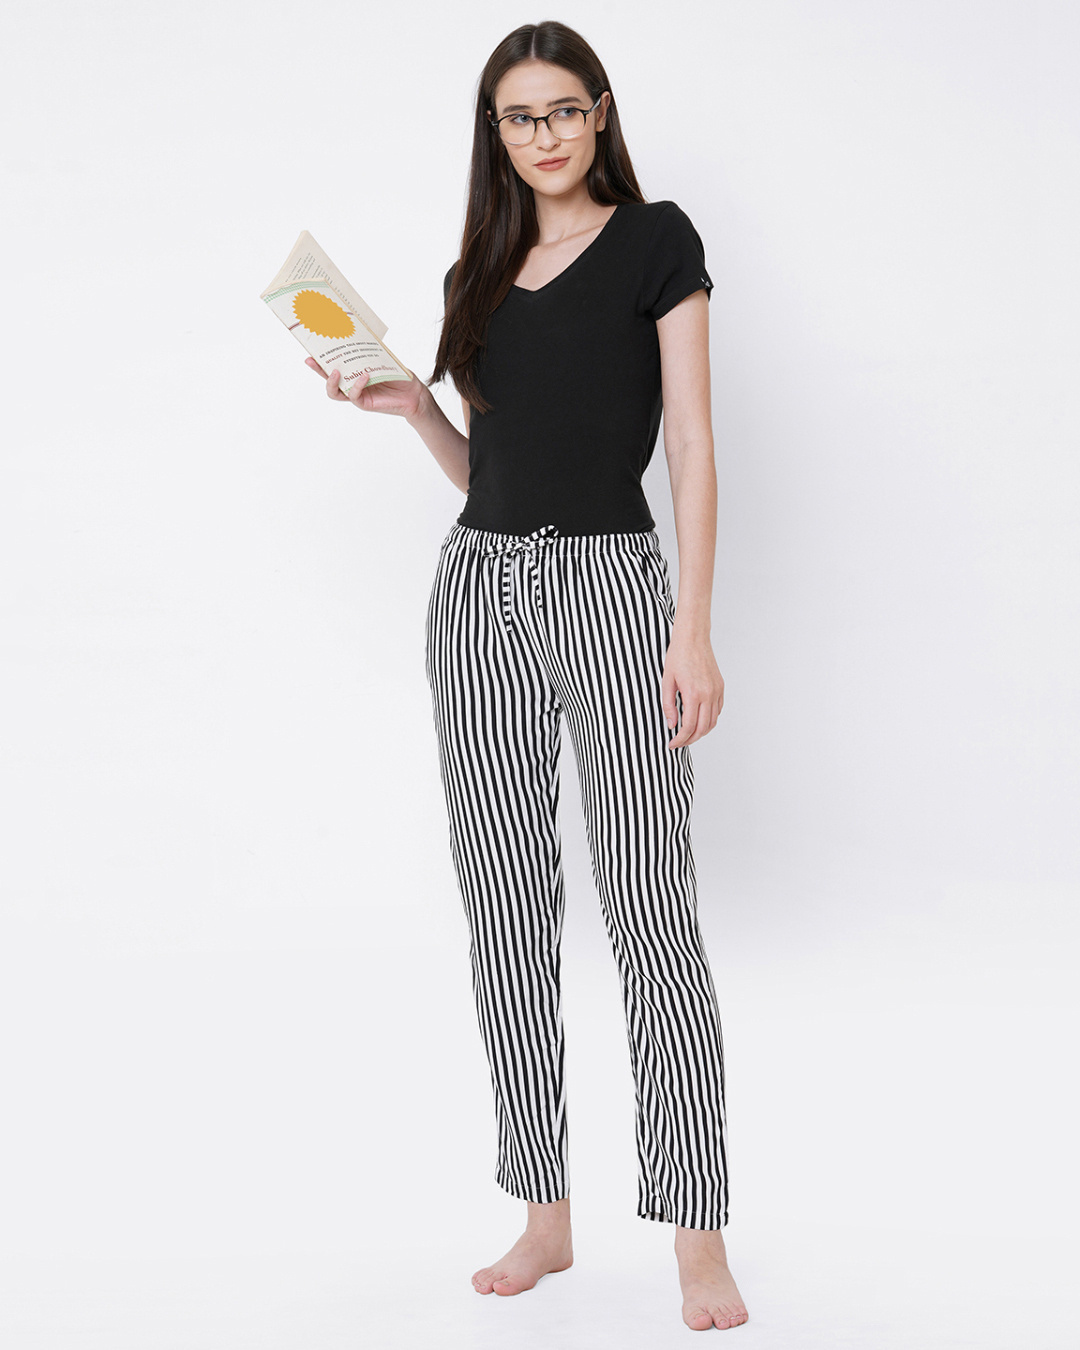 how to wear a striped pant - Αναζήτηση Google | Stripe pants outfit, Black  and white pants, Black and white striped pants